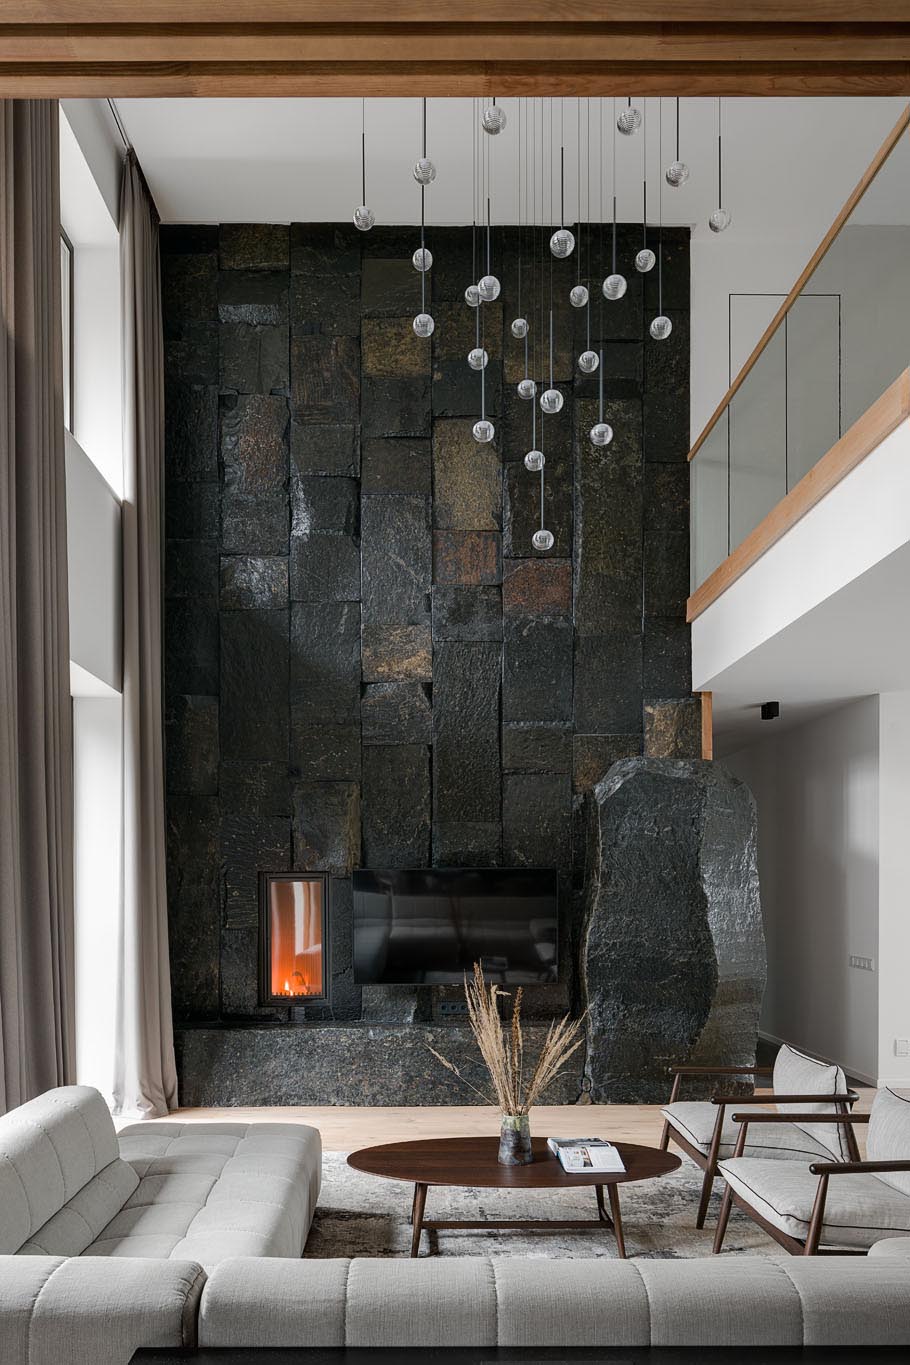 In this modern living room, there's a double height ceiling with a sculptural light installation, and a large, dark, and monumental natural stone boulder wall that's used as a backdrop for the fireplace and television.